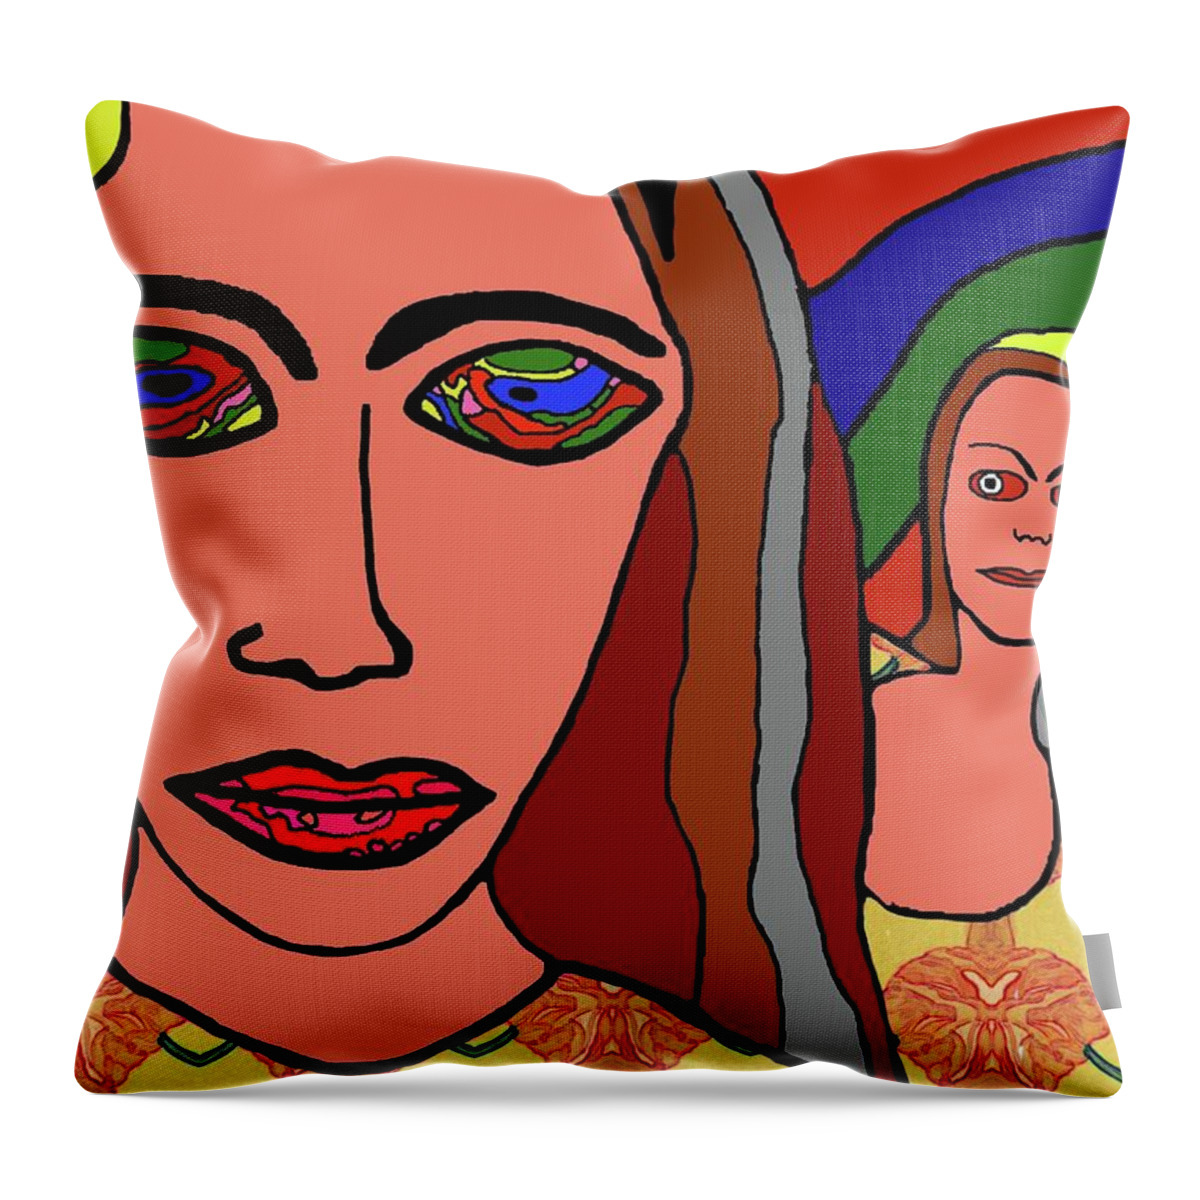 Abstract Throw Pillow featuring the digital art Sibling Rivalry by Laura Smith